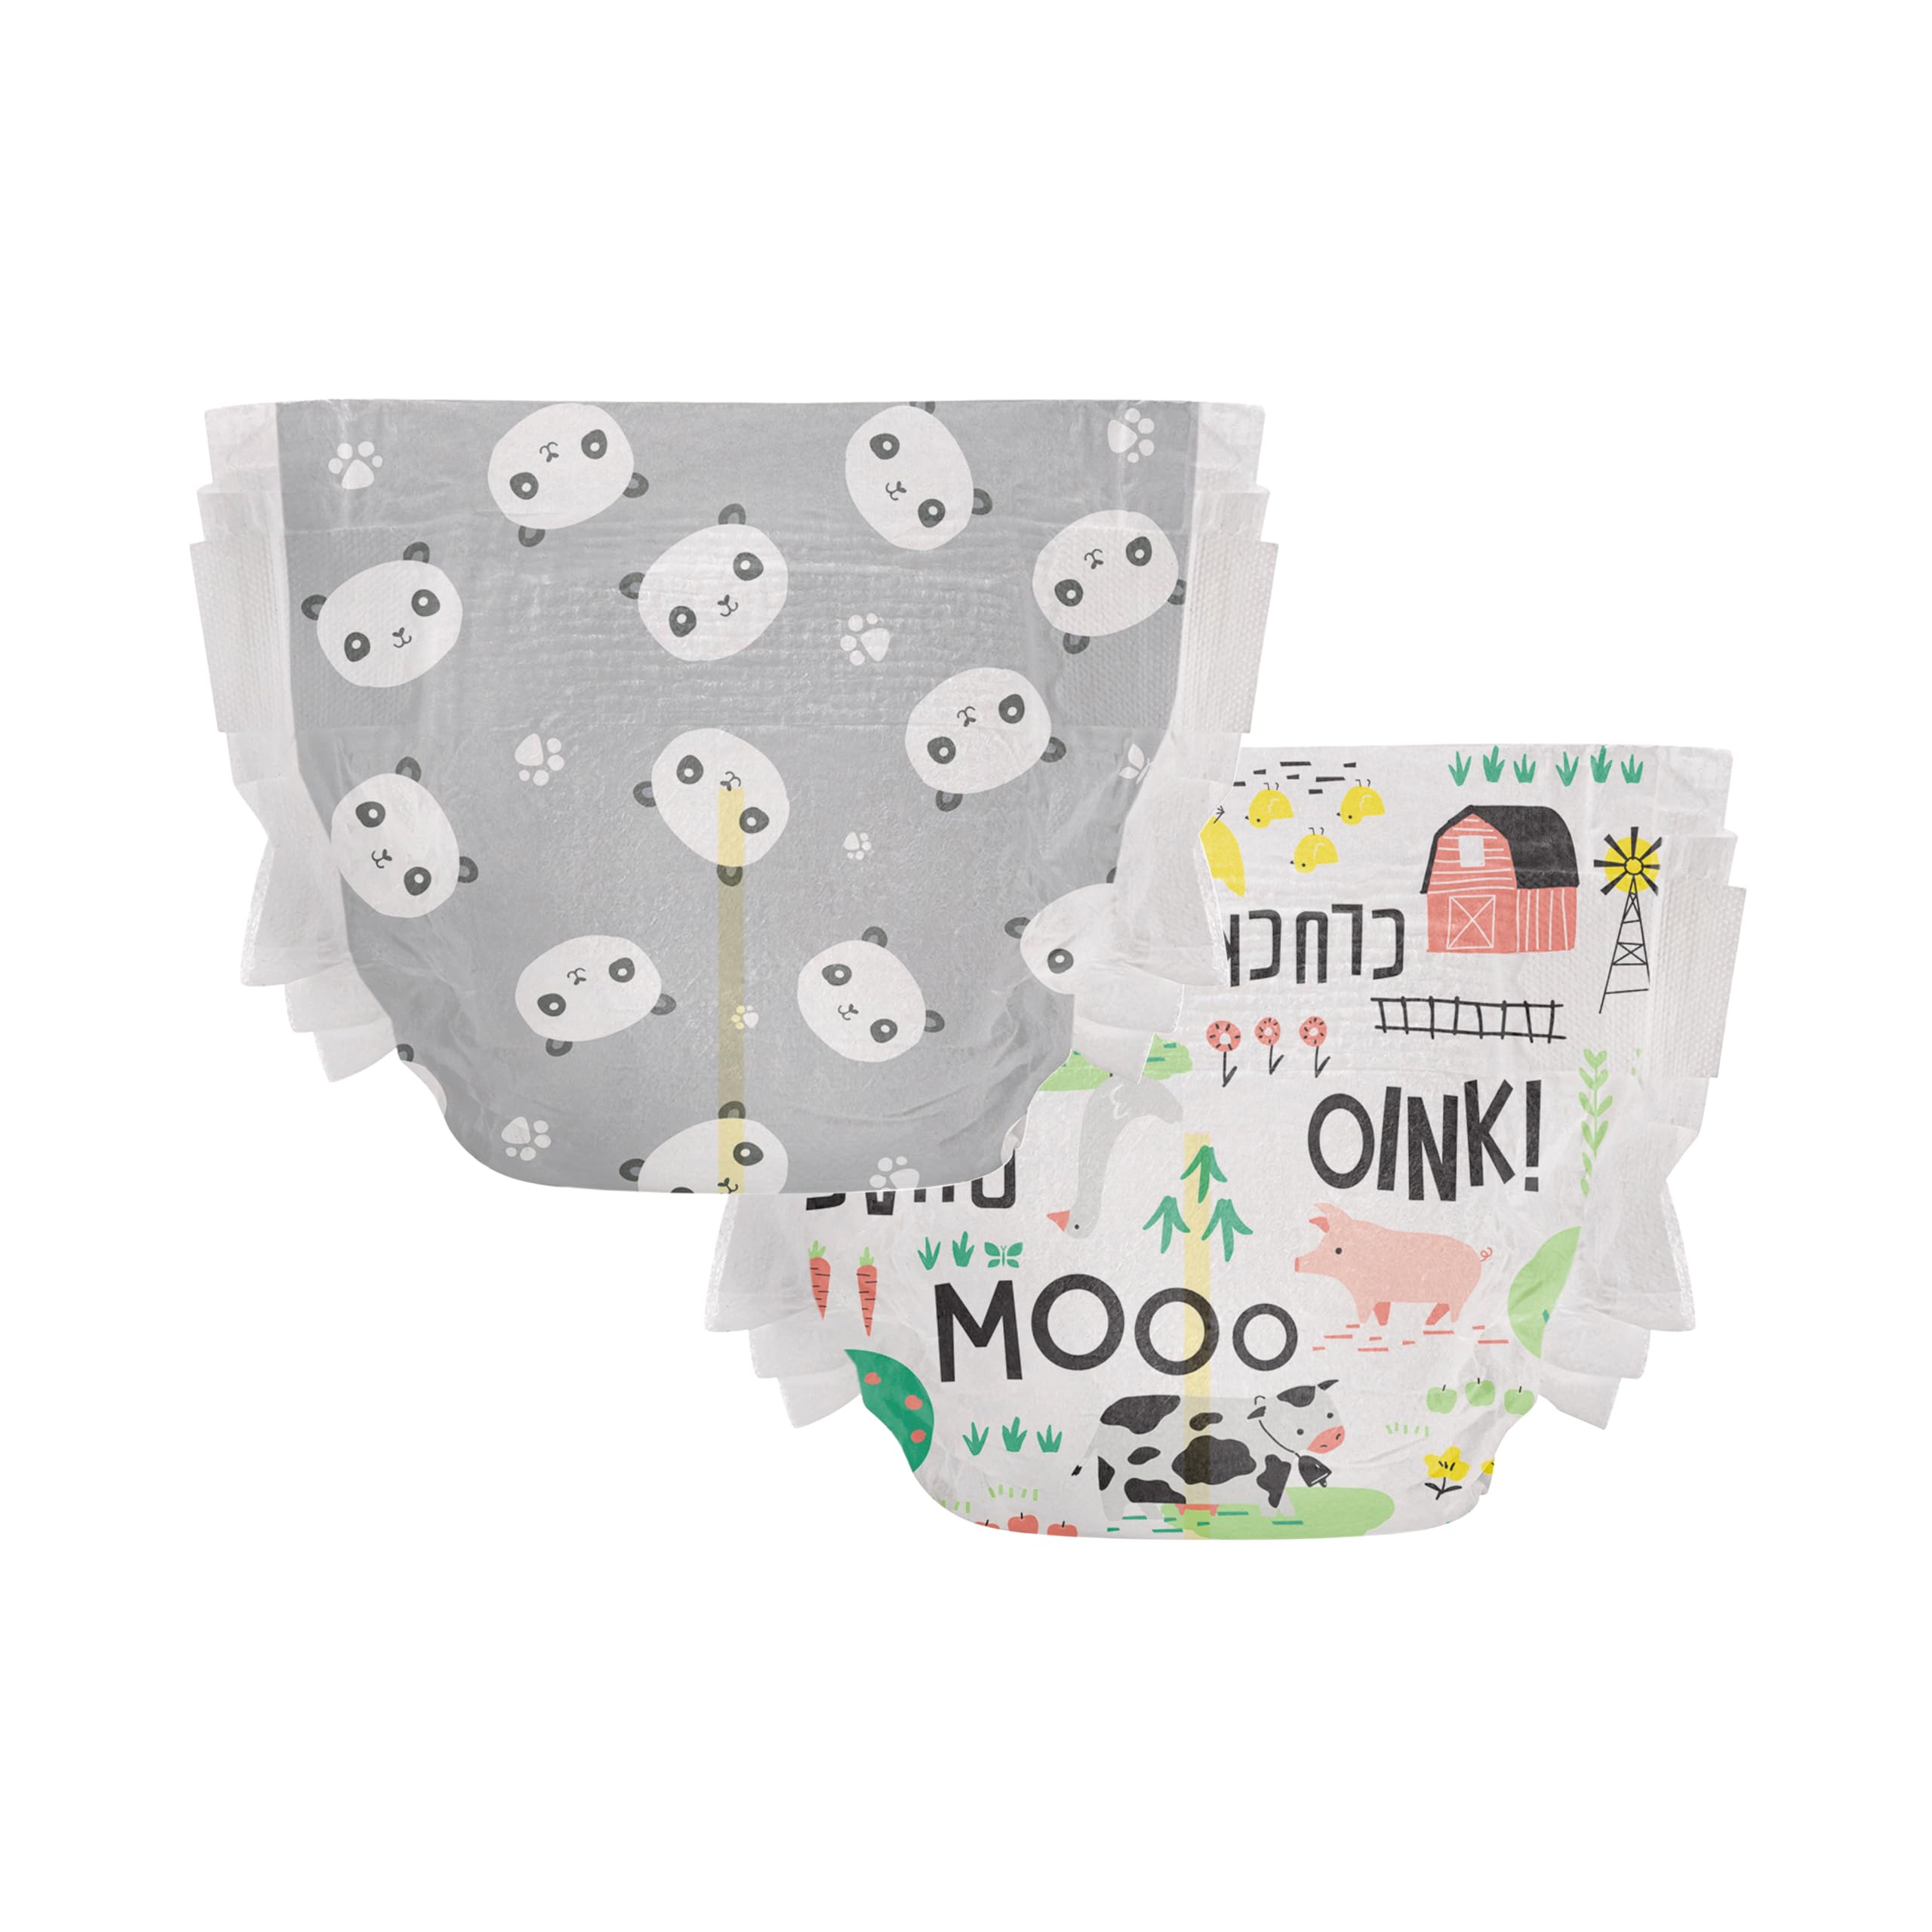 The Honest Company Clean Conscious Diapers | Plant-Based, Sustainable | Pandas + Barnyard Babies | Super Club Box, Size 2 (12-18 lbs), 124 Count